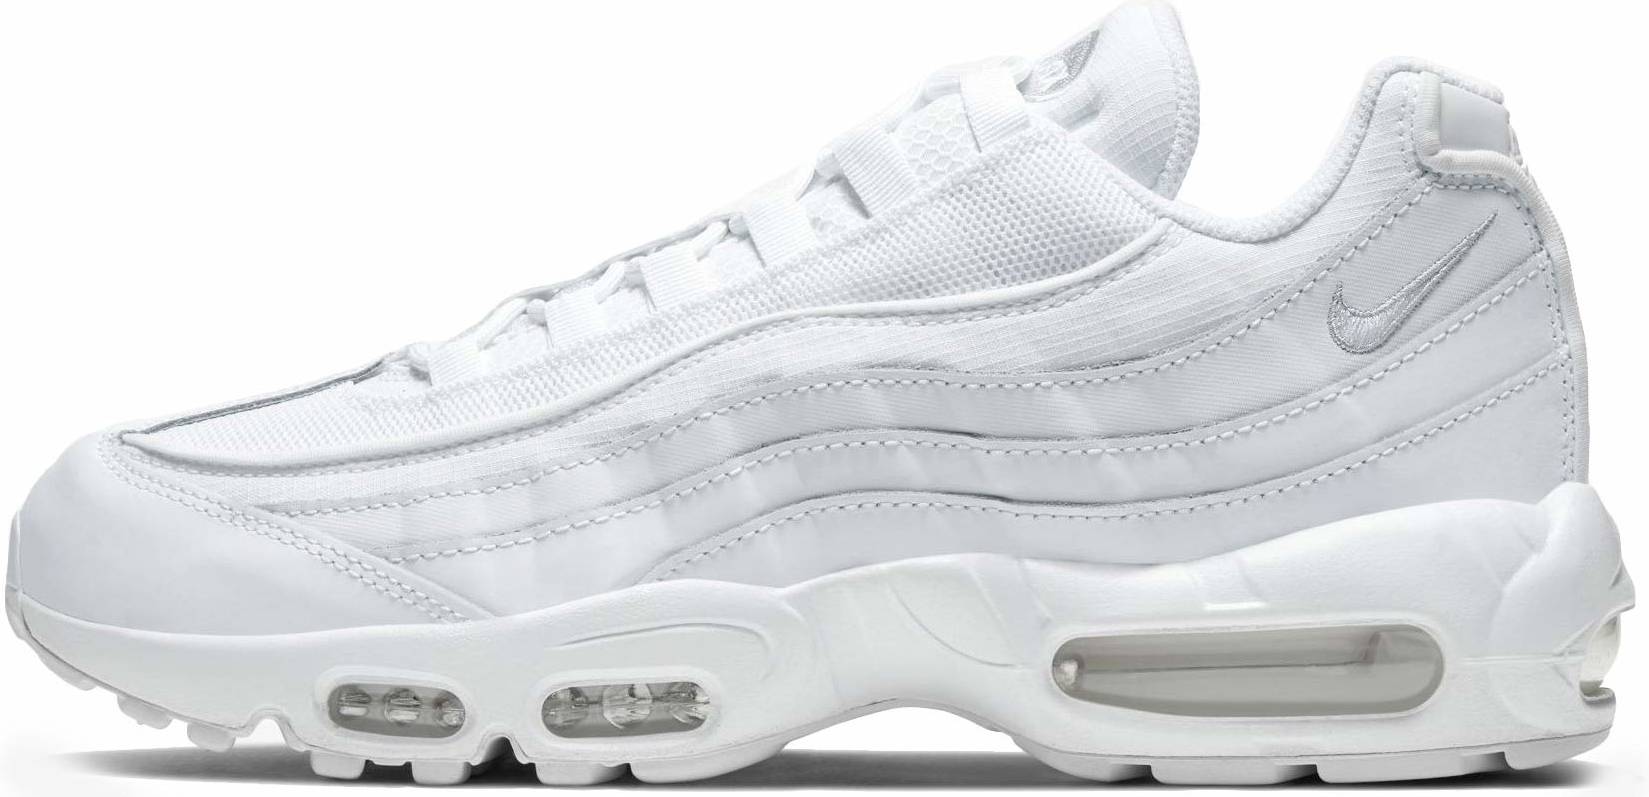 Nike Air Max 95 Essential sneakers in 20+ colors (only $135 